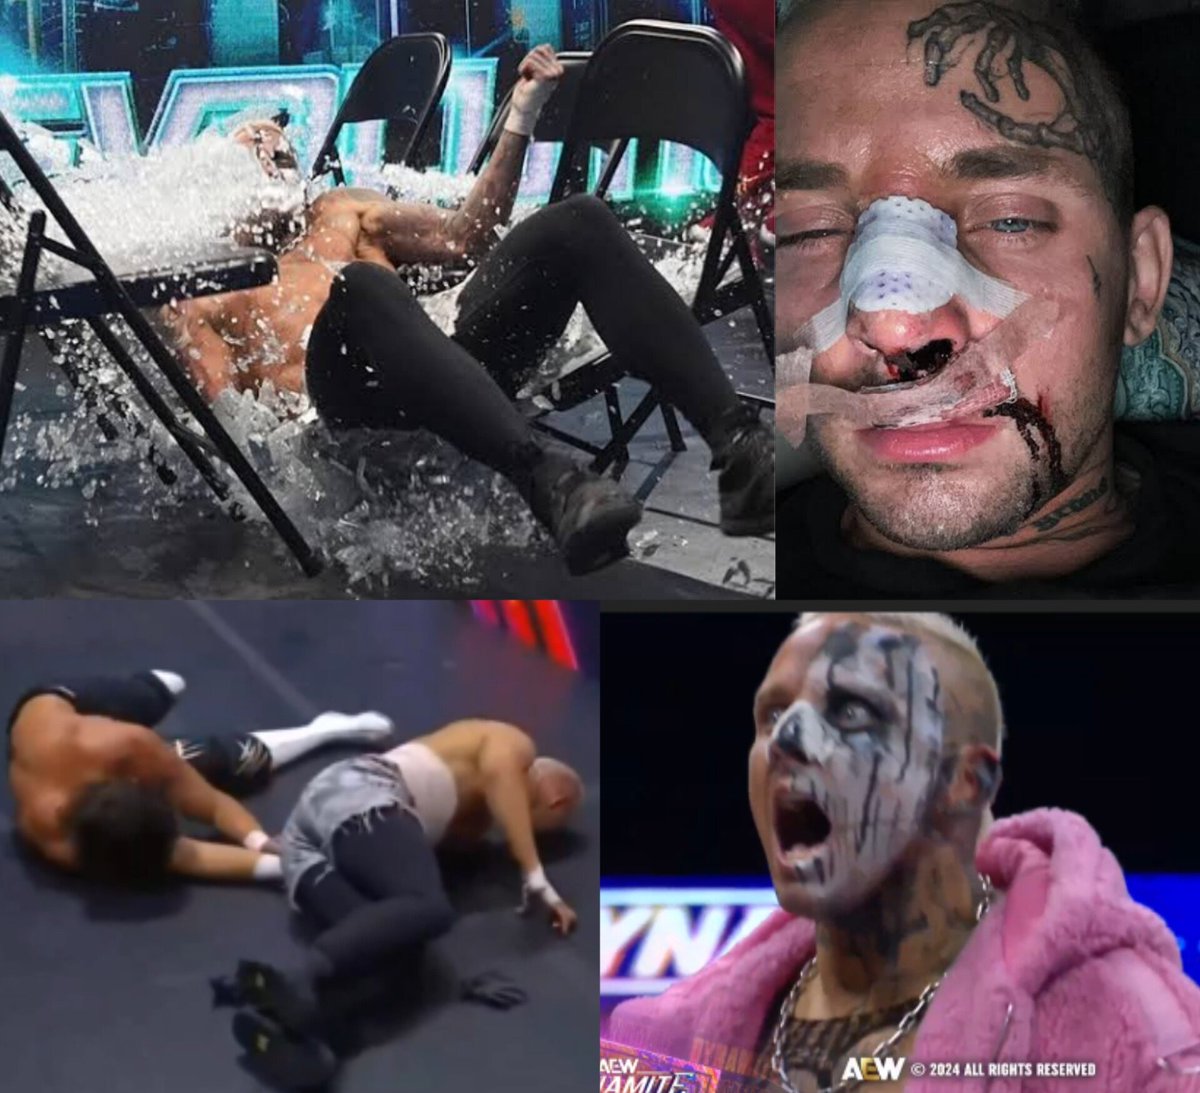 Darby Allin in the last 2 months:
• Went through a glass of pane from the ladder above
• Broke his foot in the match with Jay White
• Got hit by a bus in NYC and broke his nose
• Came back, said he's not 100% yet but still wrestling for Anarchy in the Arena

PSYCHOPATH.